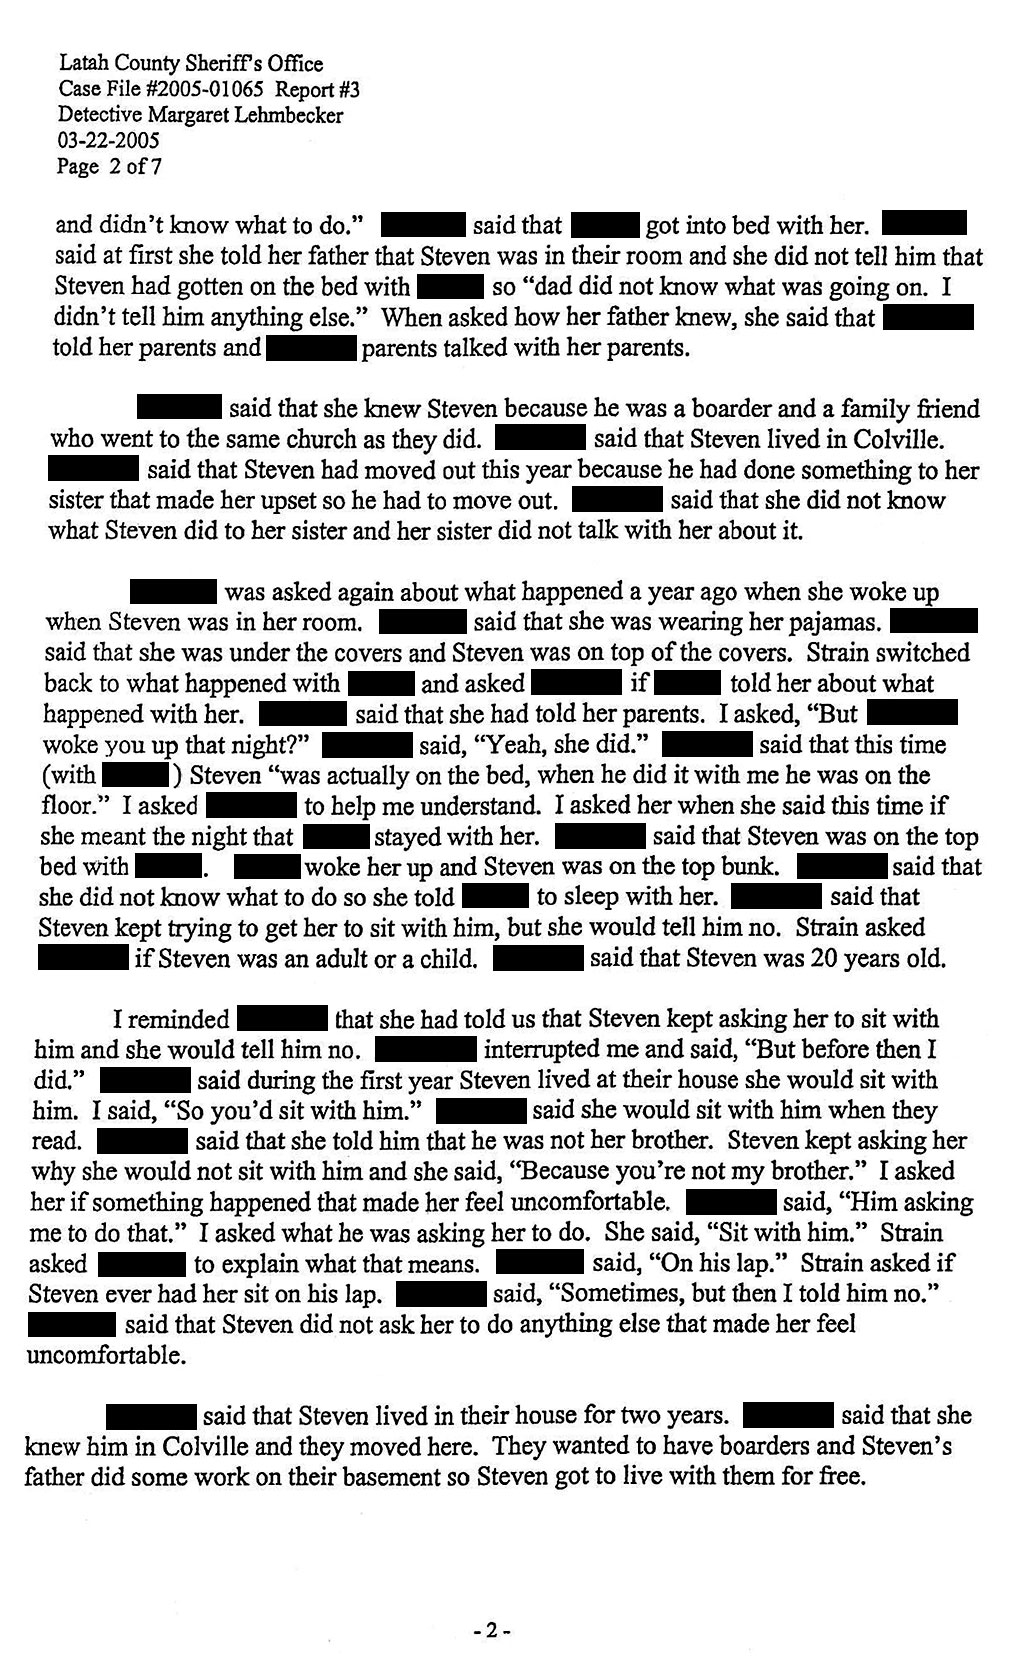 Report #3 page 2 of 7: “. . . she was under the covers and Steven was on top of the covers.”